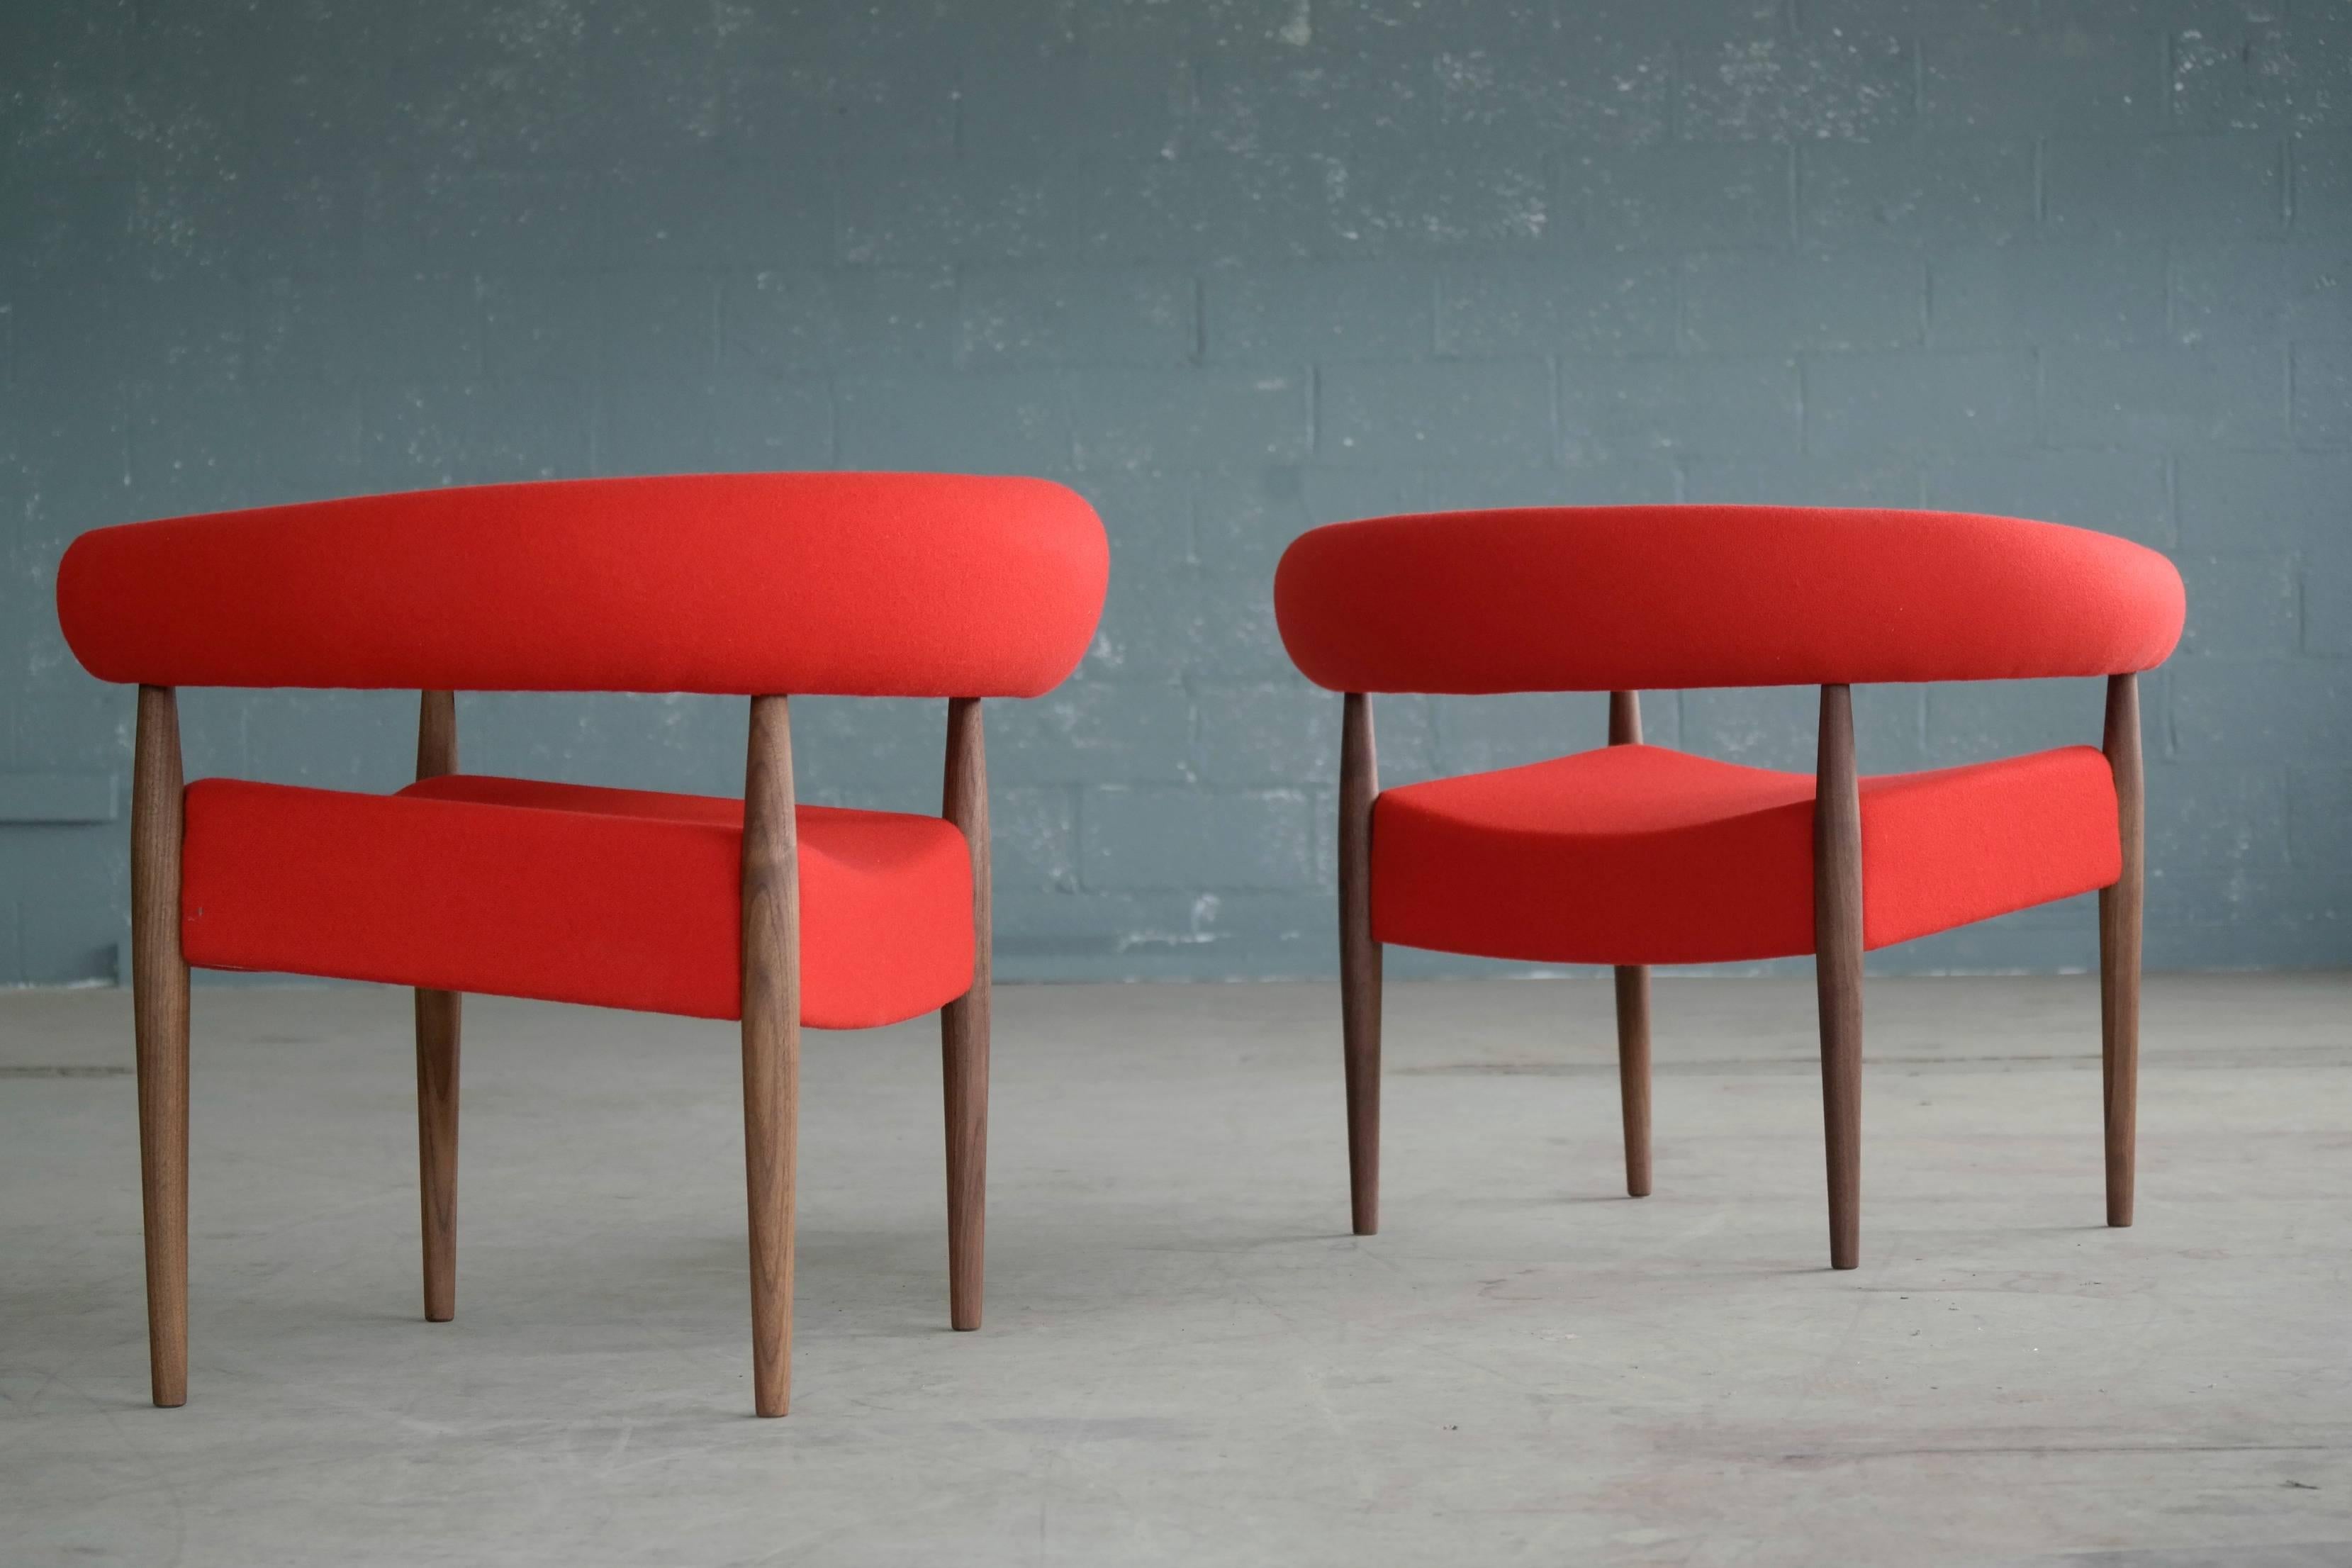 New production of Nanna and Jorgen Ditzel's ring chair manufactured by GETAMA. GETAMA had a long relationship with Nanna Ditzel, often called the "Queen" of Danish Design. The ring chair designed in 1958 was out of production for many